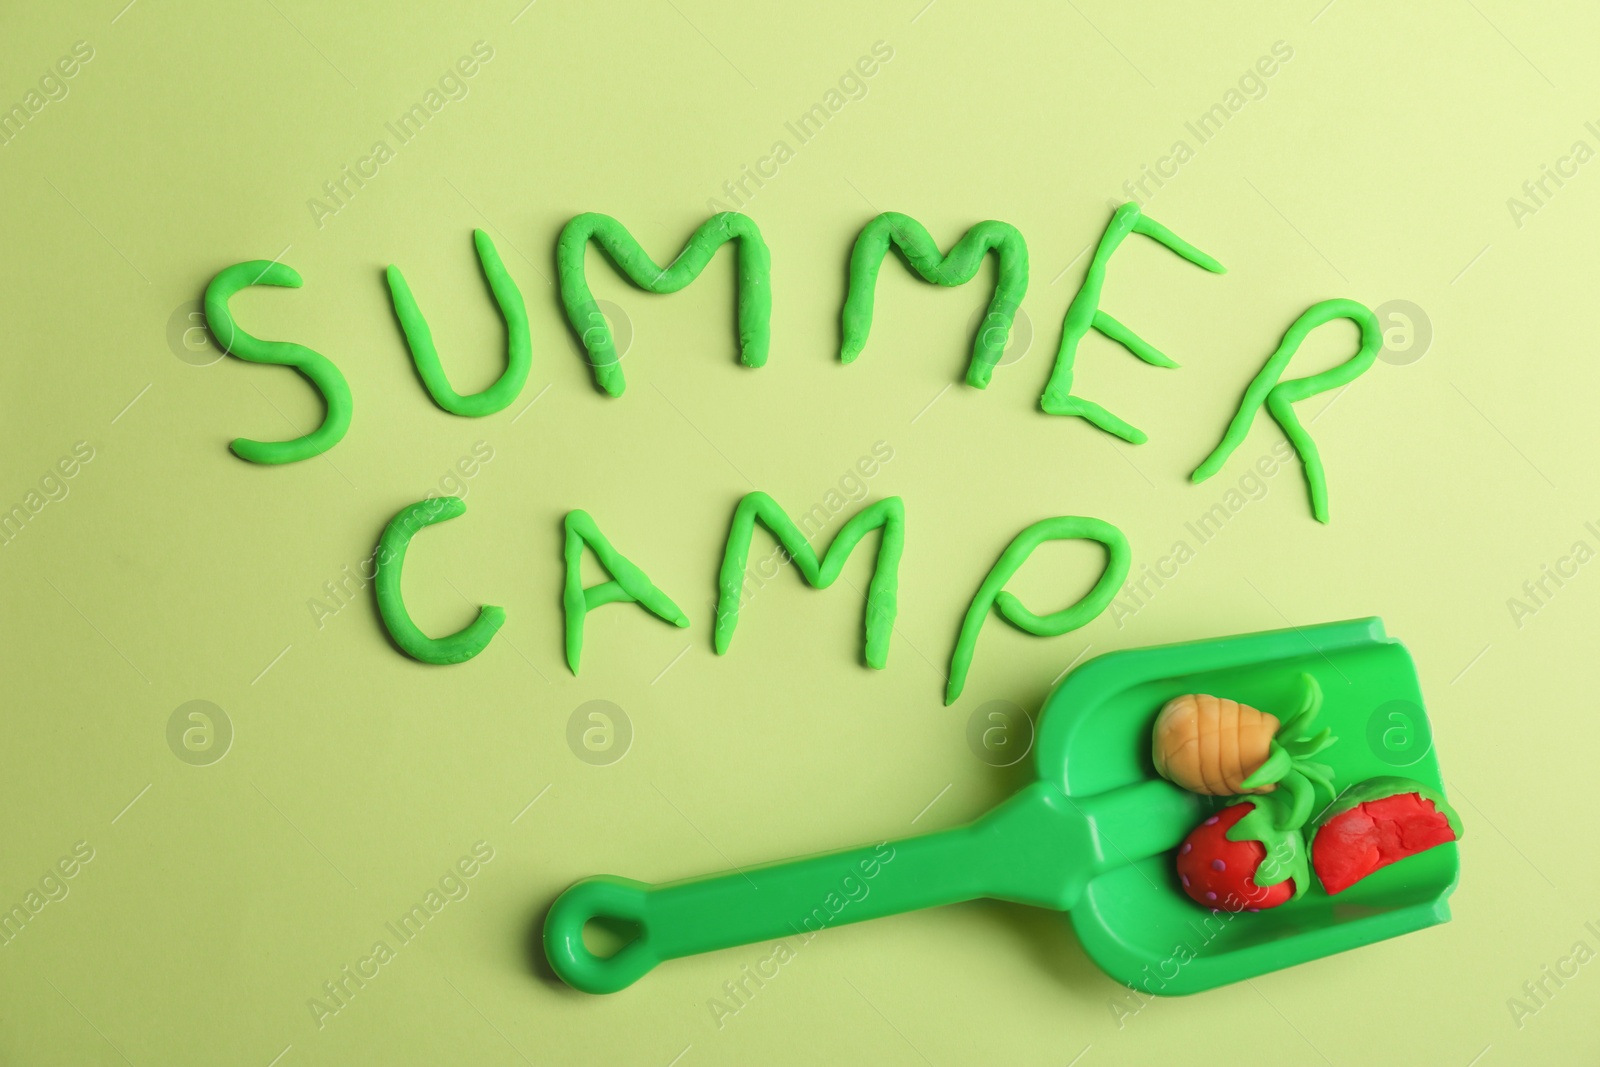 Photo of Flat lay composition with words SUMMER CAMP made from modelling clay and plastic shovel on color background